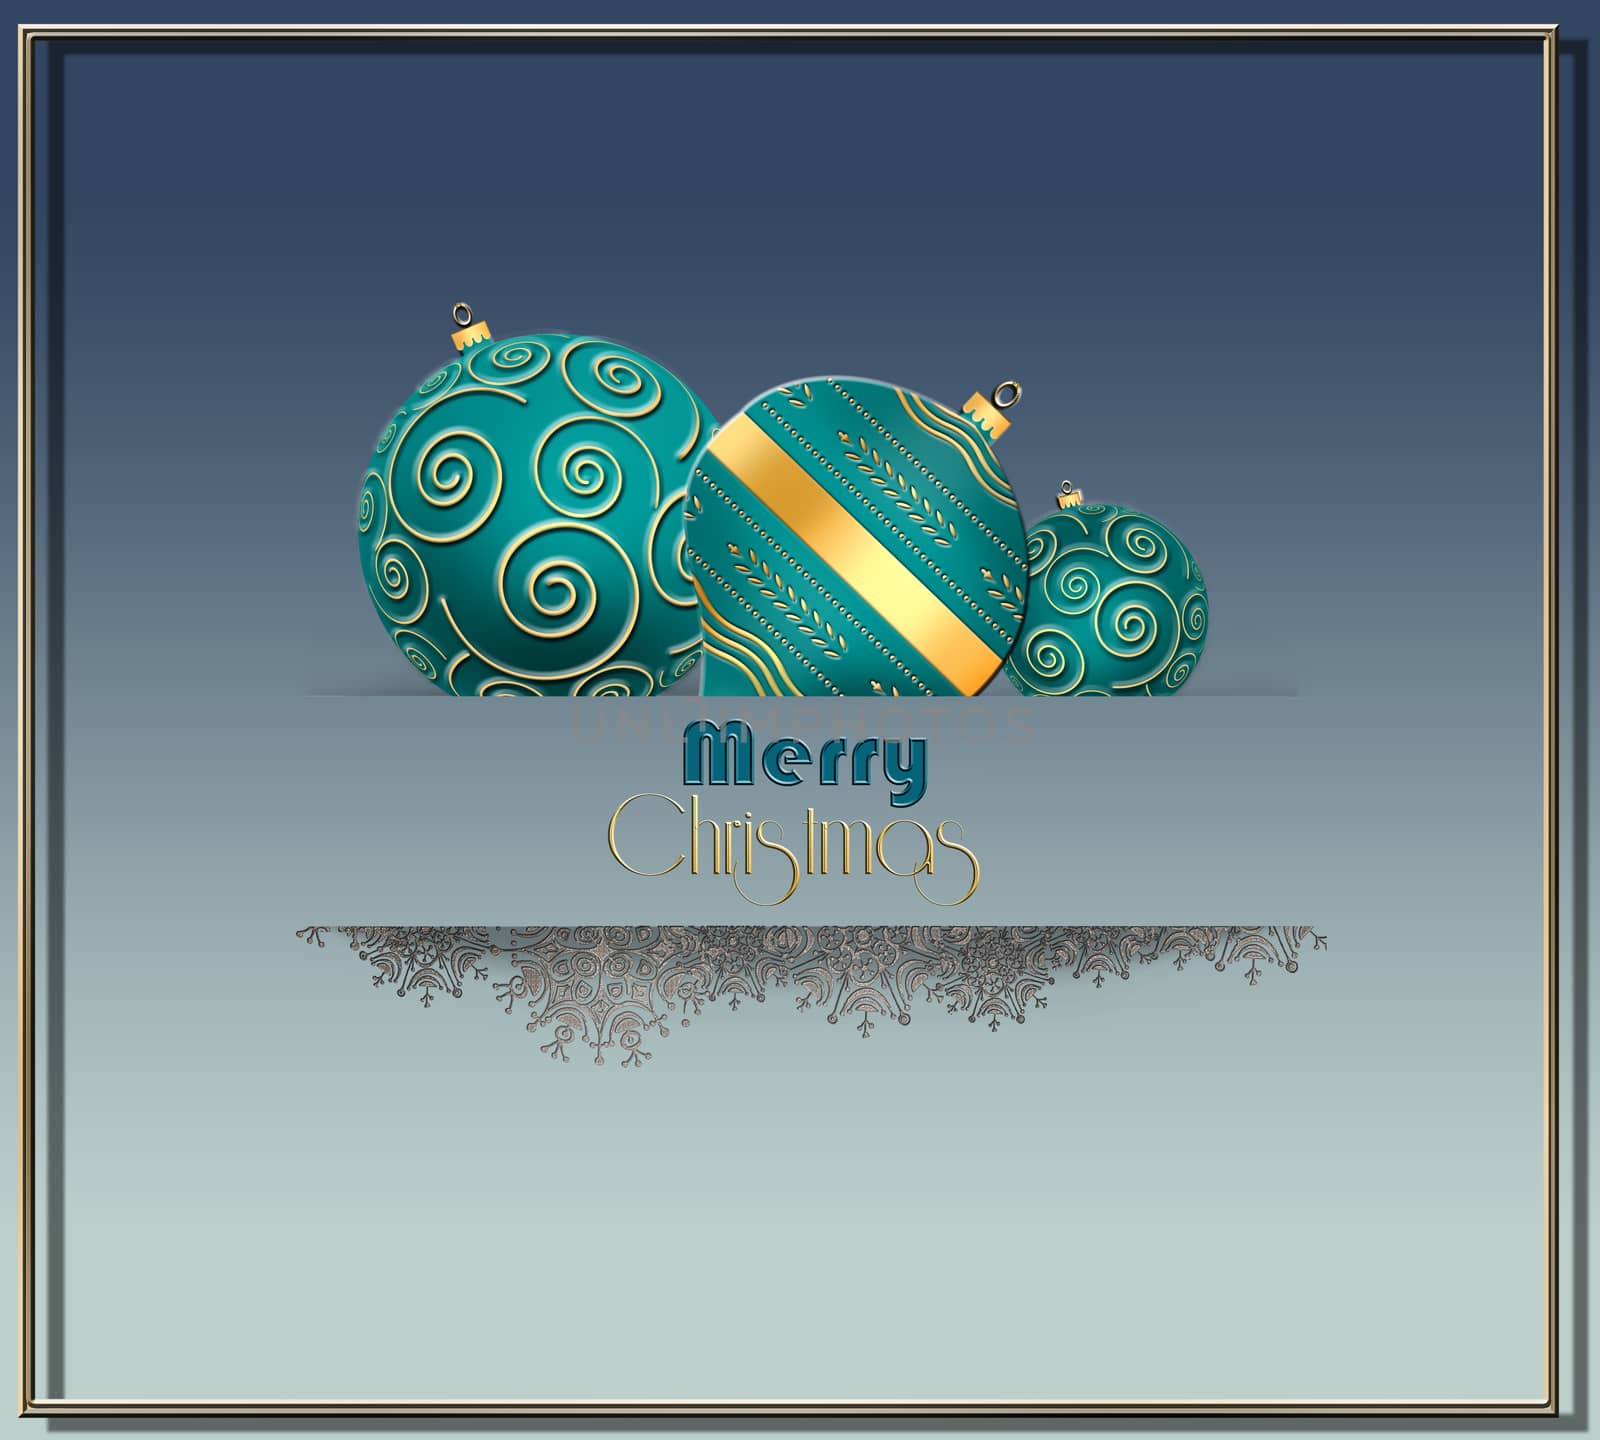 Beautiful Christmas 2021 New Year card card with turquoise blue green balls with gold ornament, snowflakes border in paper stripe on pastel blue background. Text Merry Christmas. 3D illustration